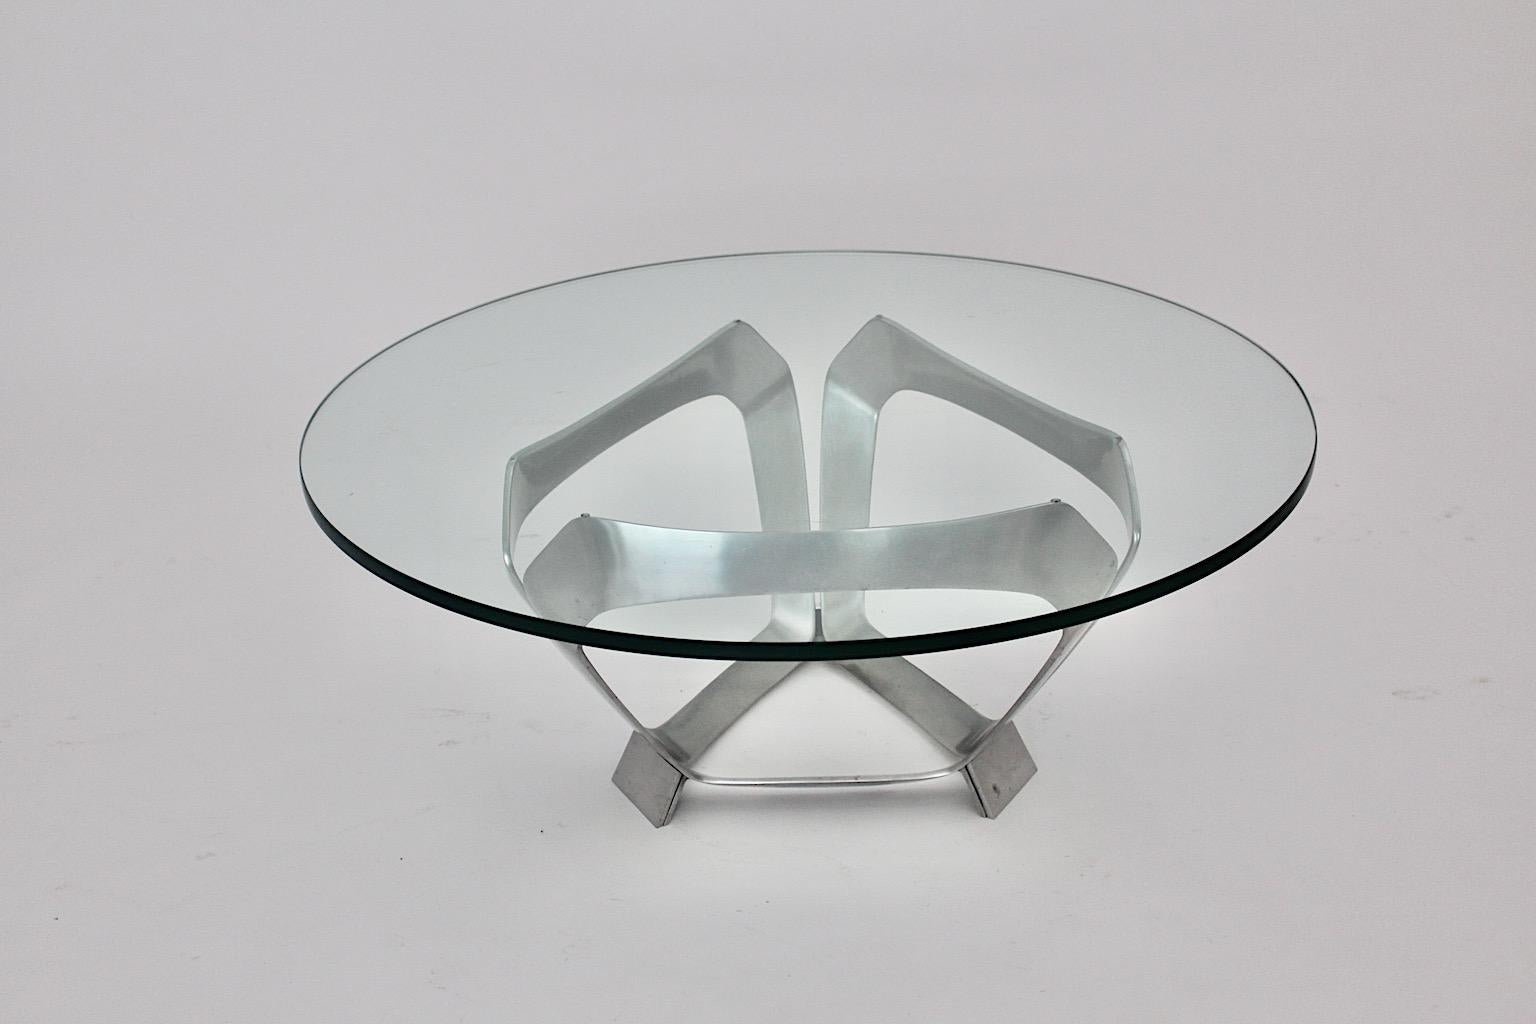 Aluminum Glass Space Age Vintage Coffee Table by Knut Hesterberg 1960s Germany For Sale 6